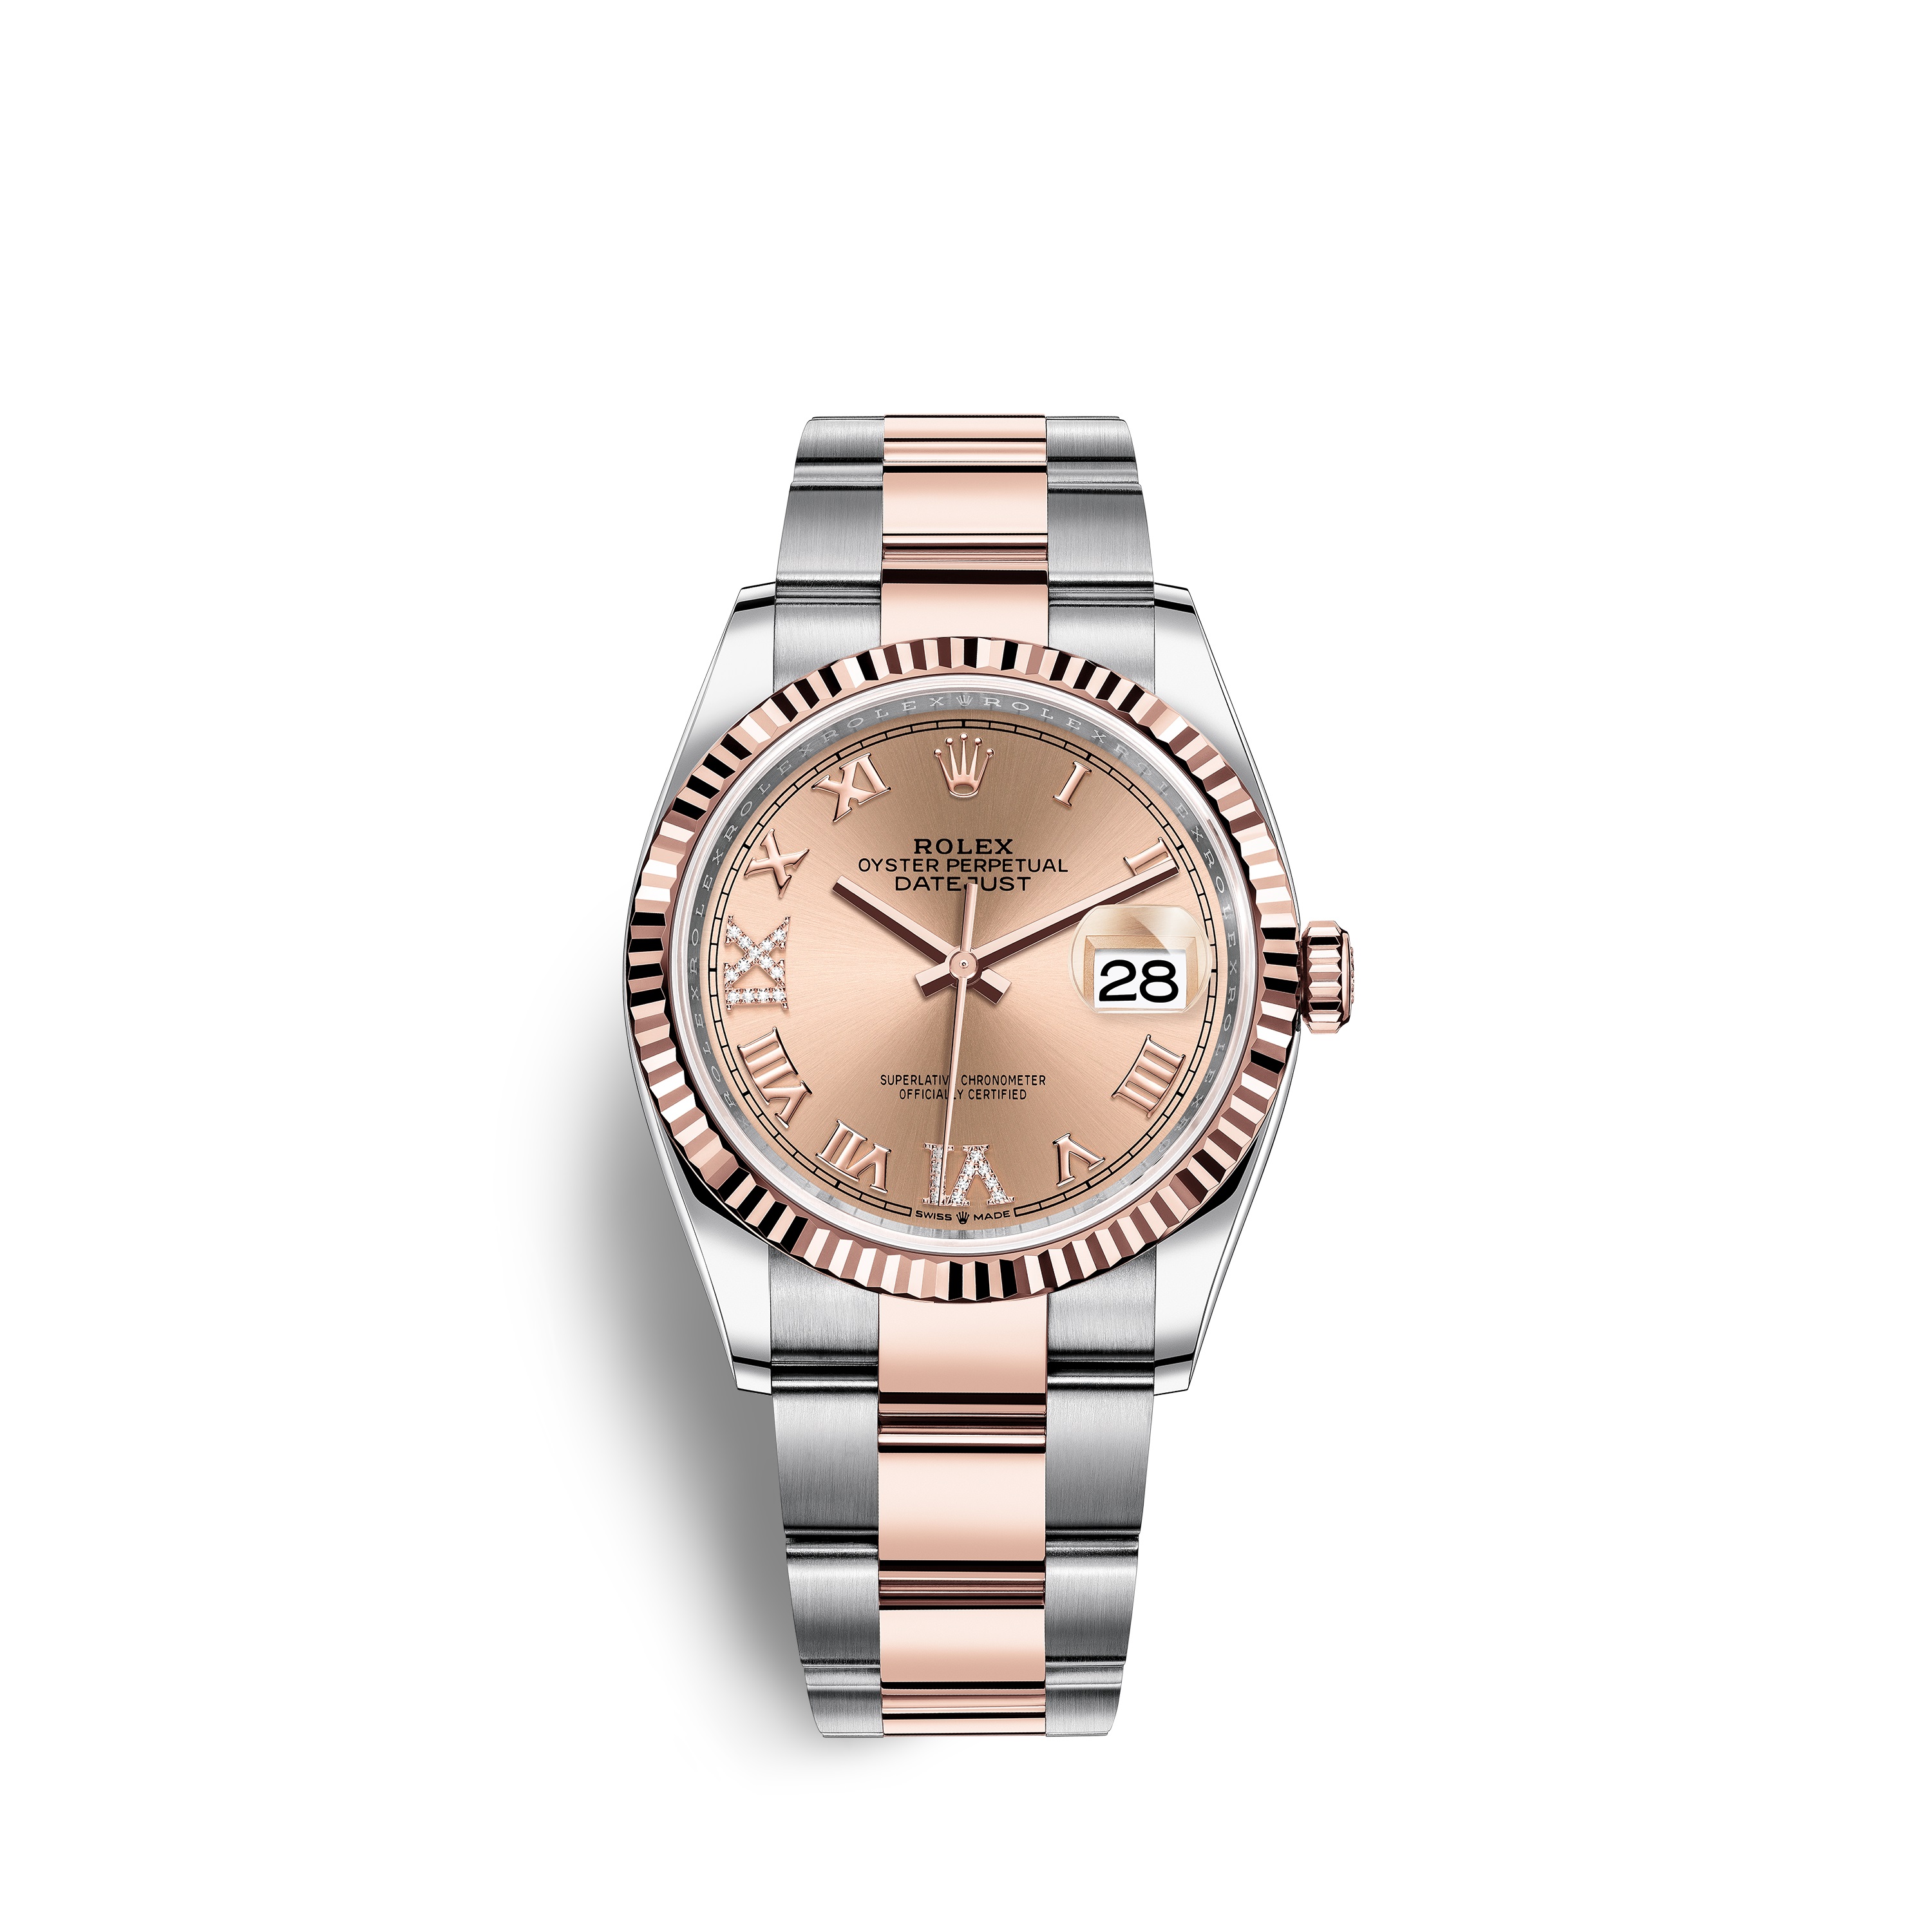 Datejust 36 126231 Rose Gold & Stainless Steel Watch (Rose Set with Diamonds)